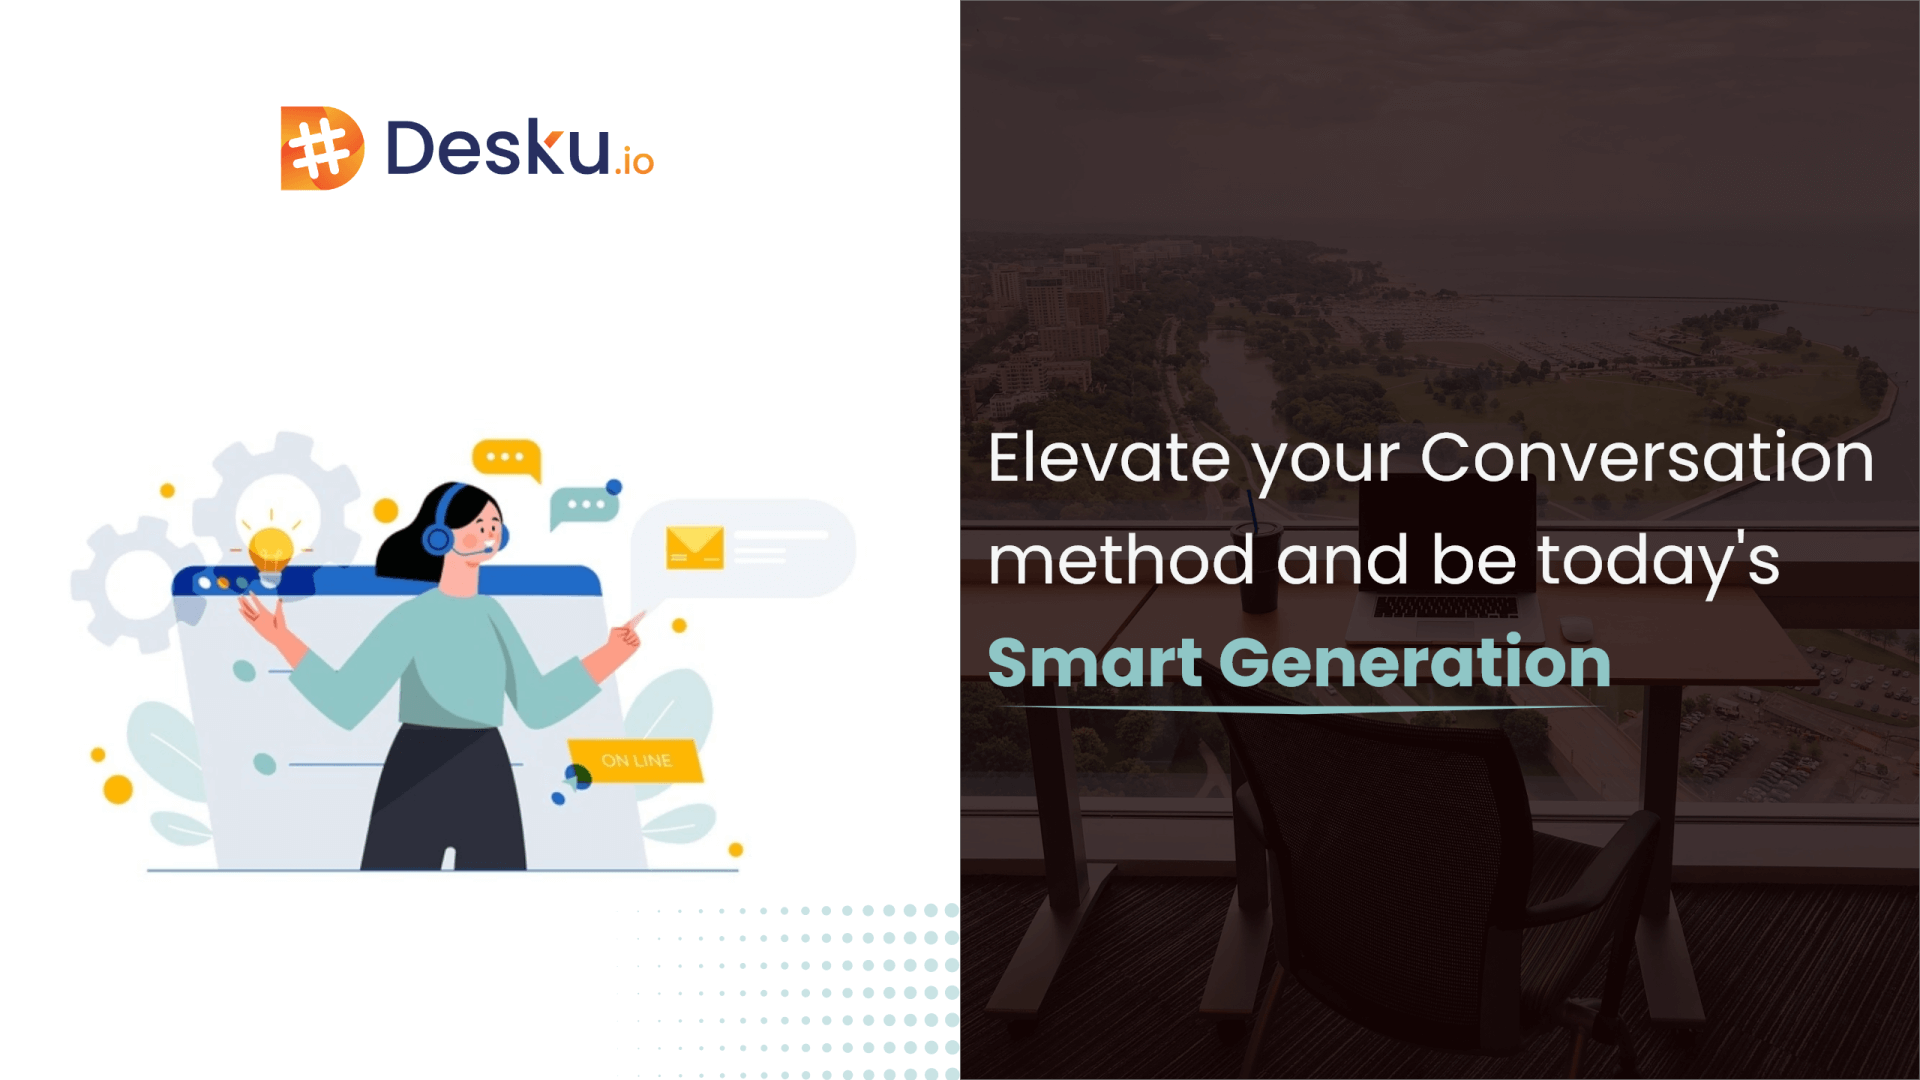 Elevate your conversation method and be today’s smart generation: Helpdesk